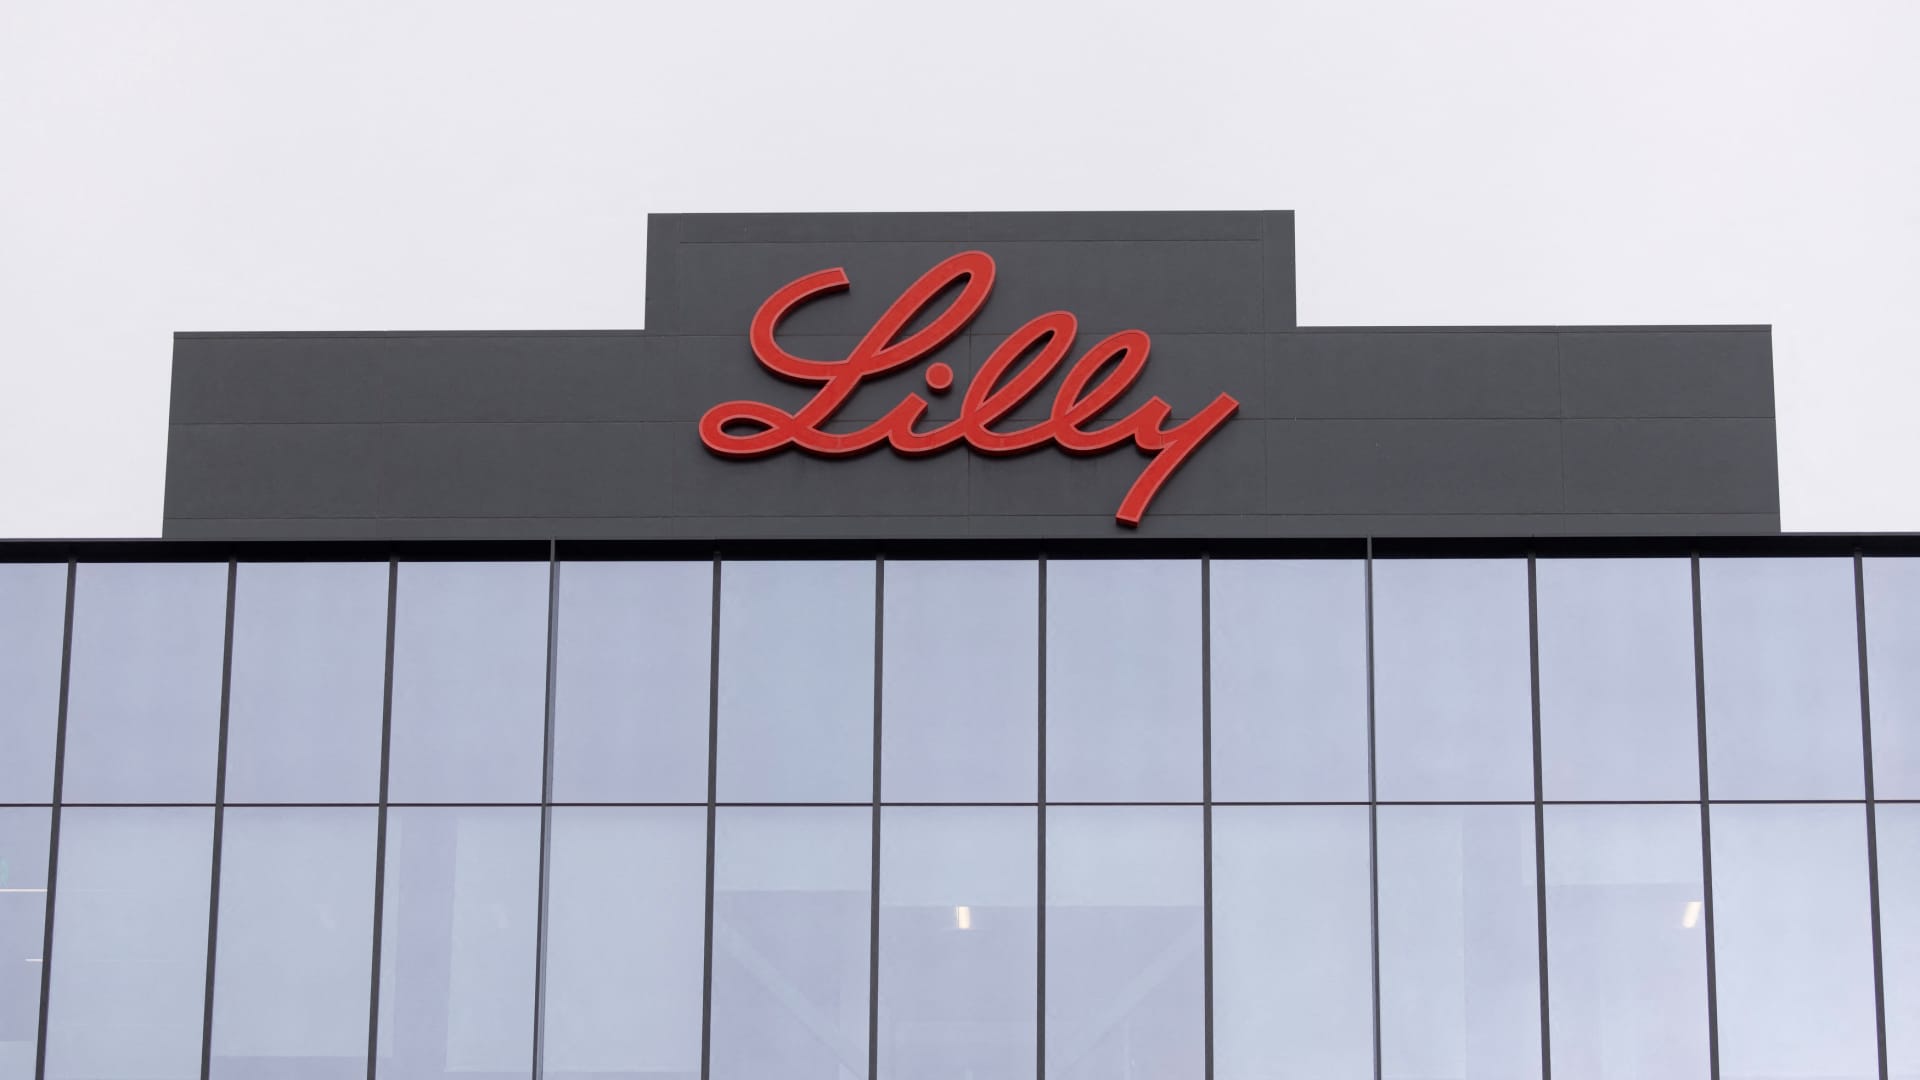 Here’s what’s driving Friday’s moves in Apple, Coterra and Eli Lilly